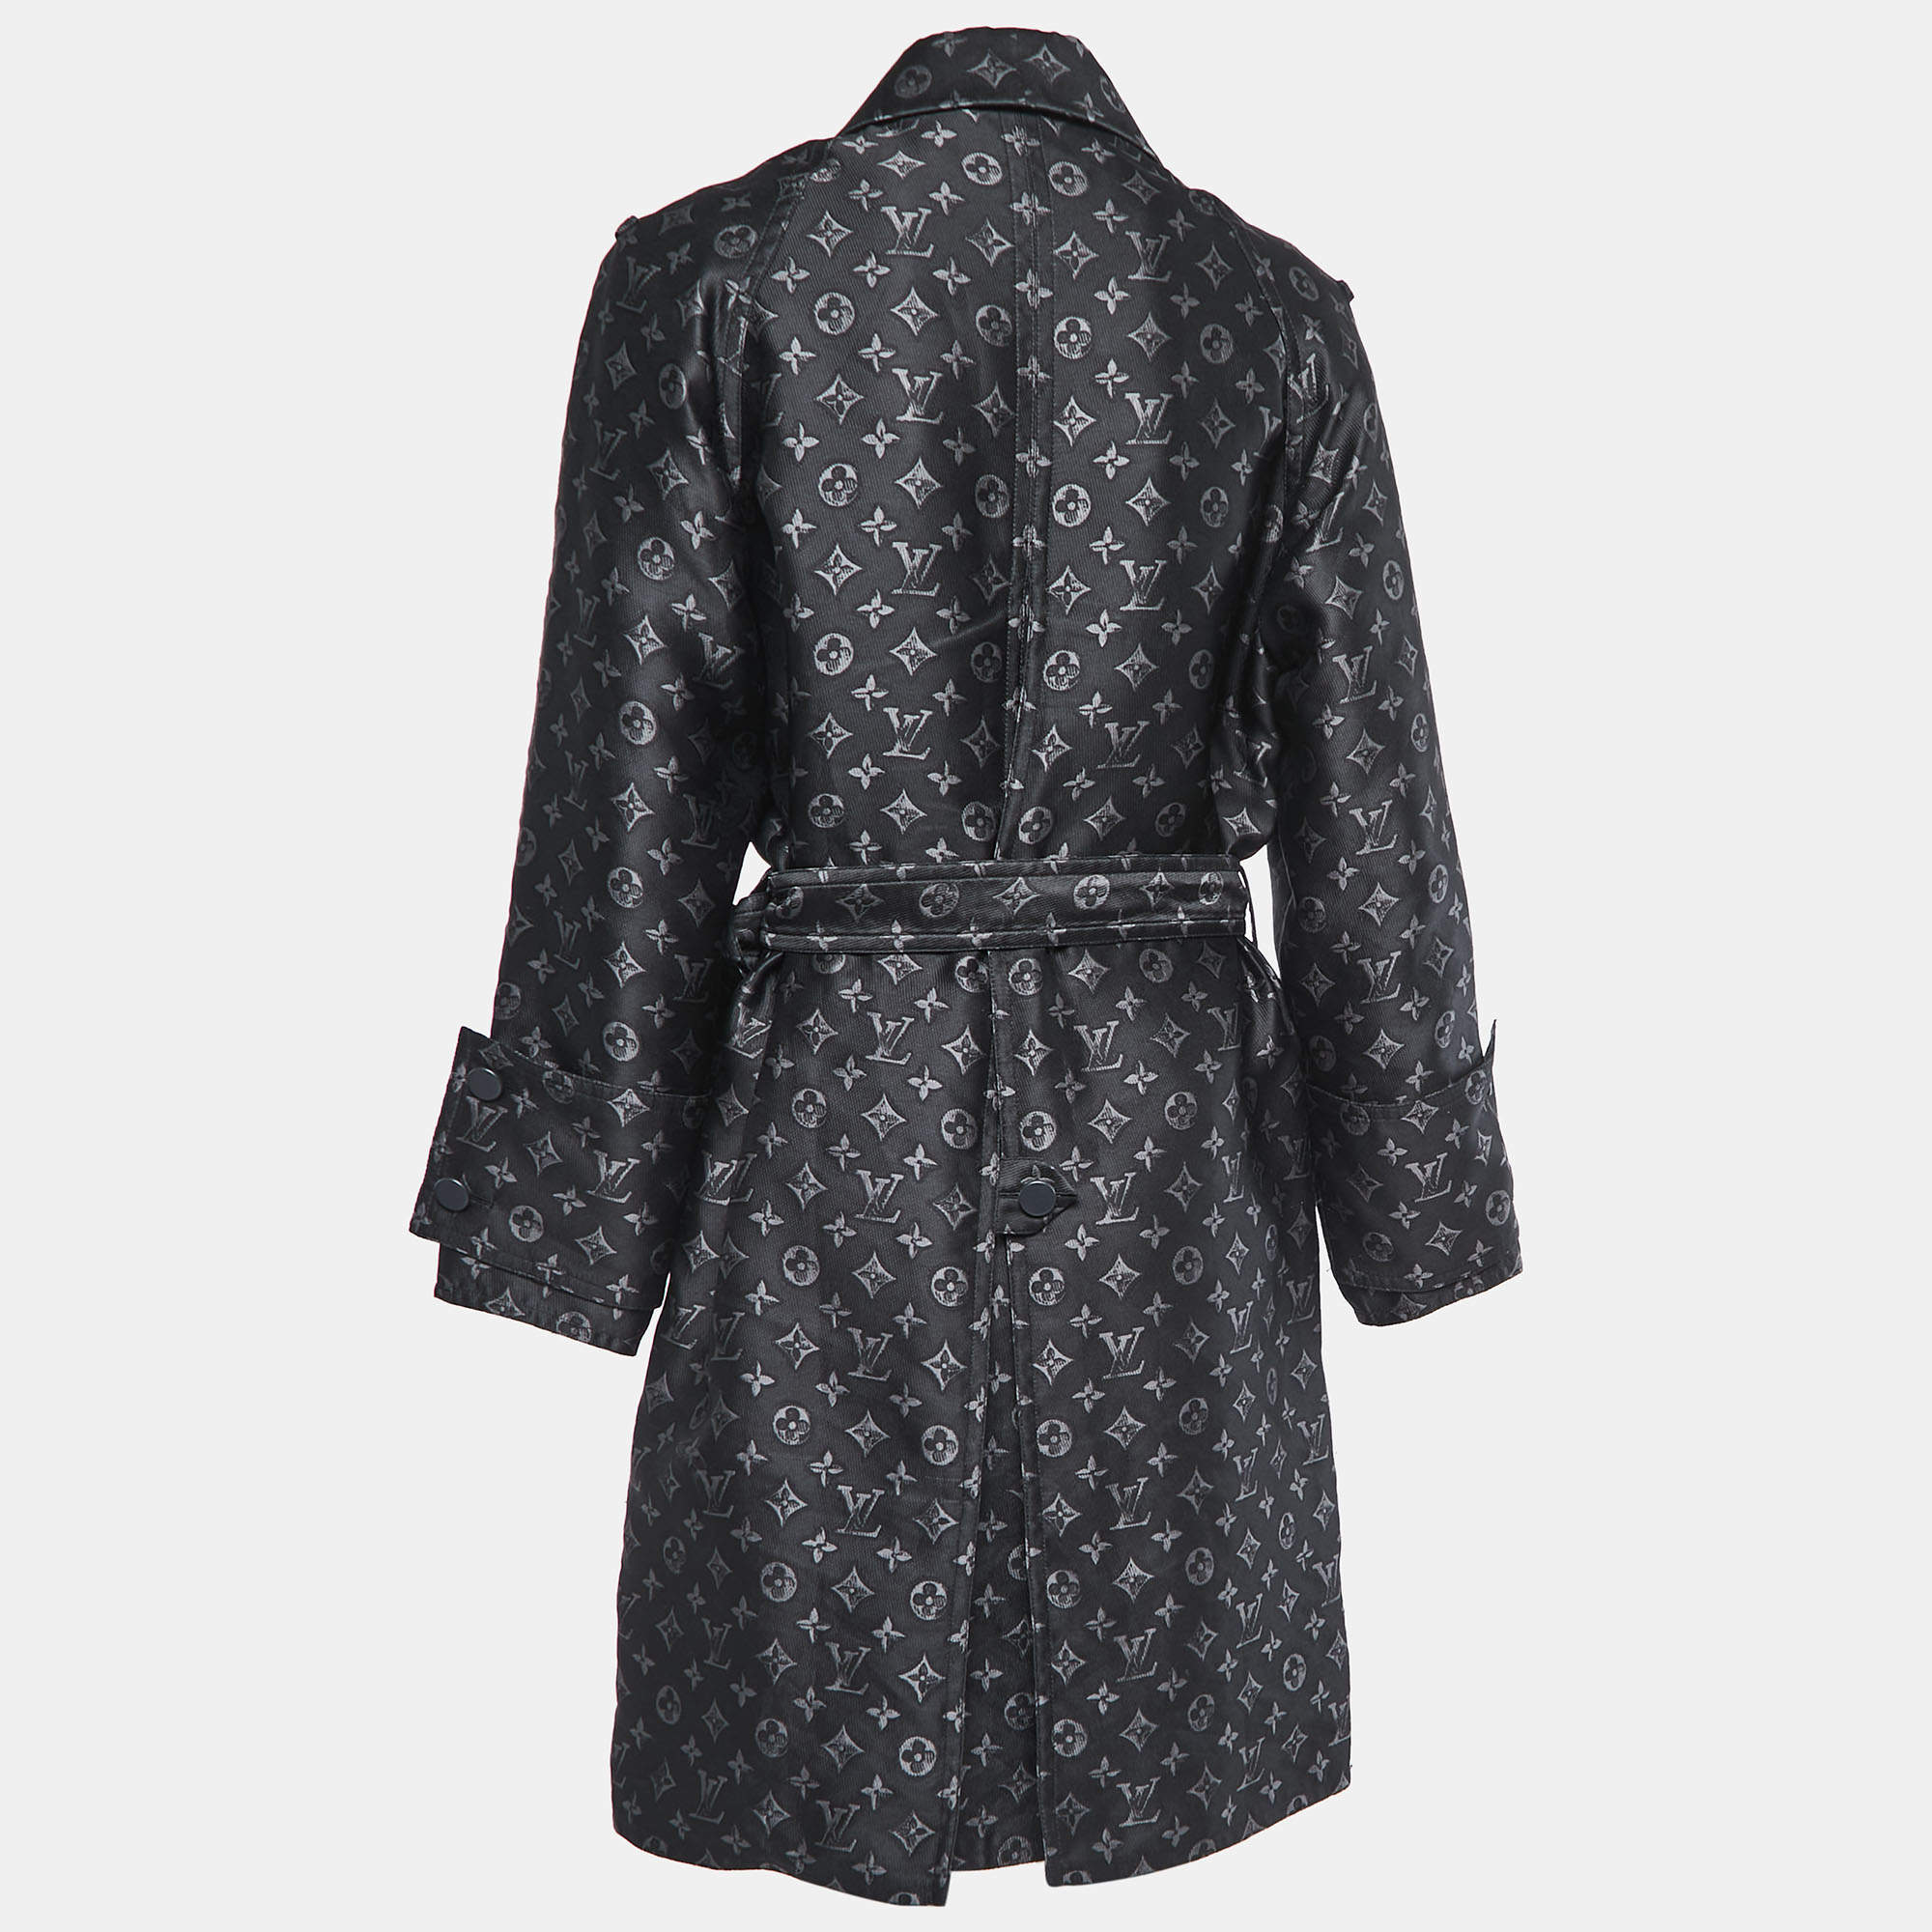 Louis Vuitton Embroidered Robe Jacket